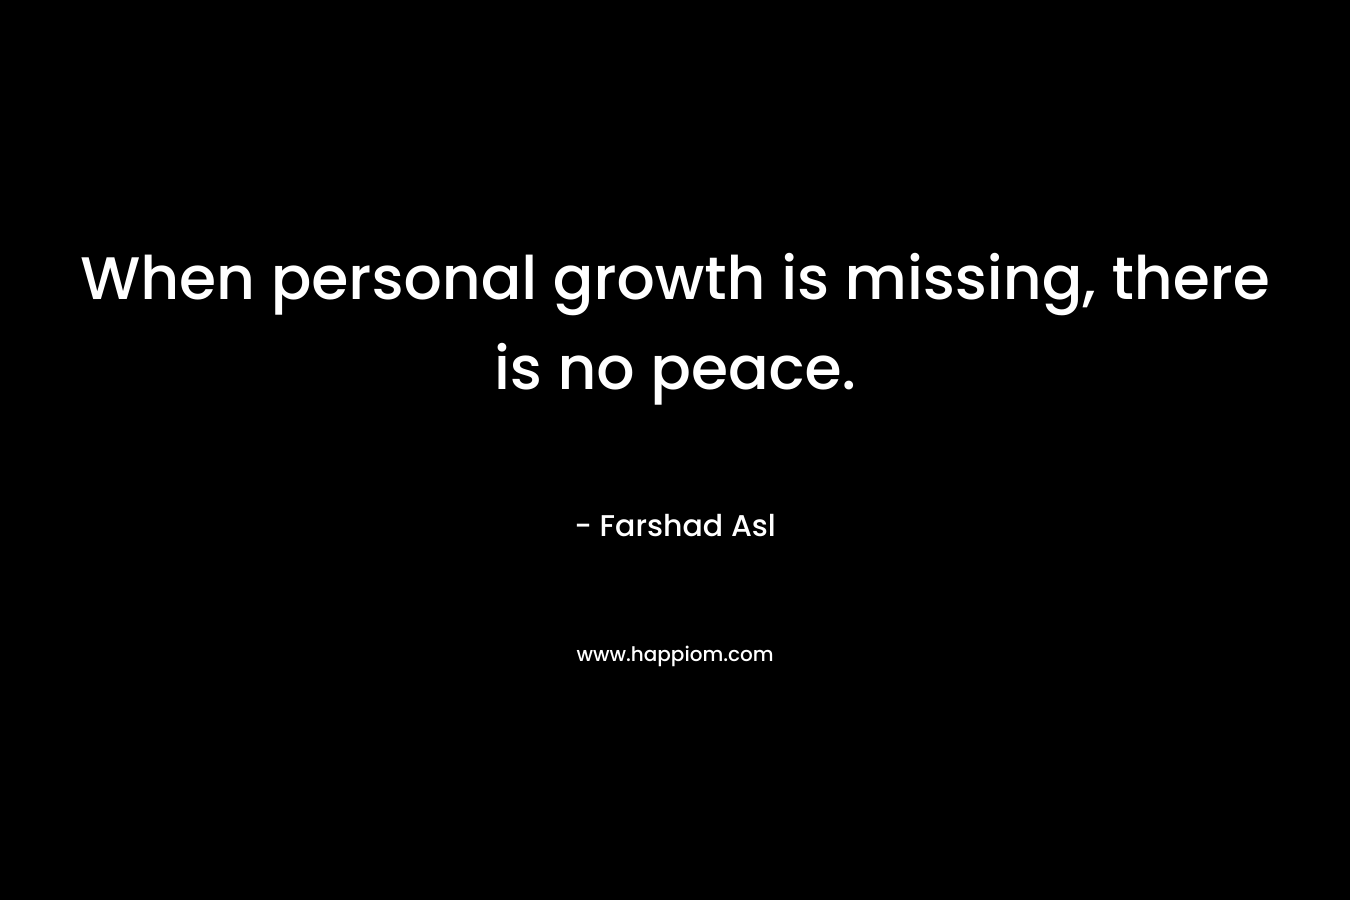 When personal growth is missing, there is no peace.